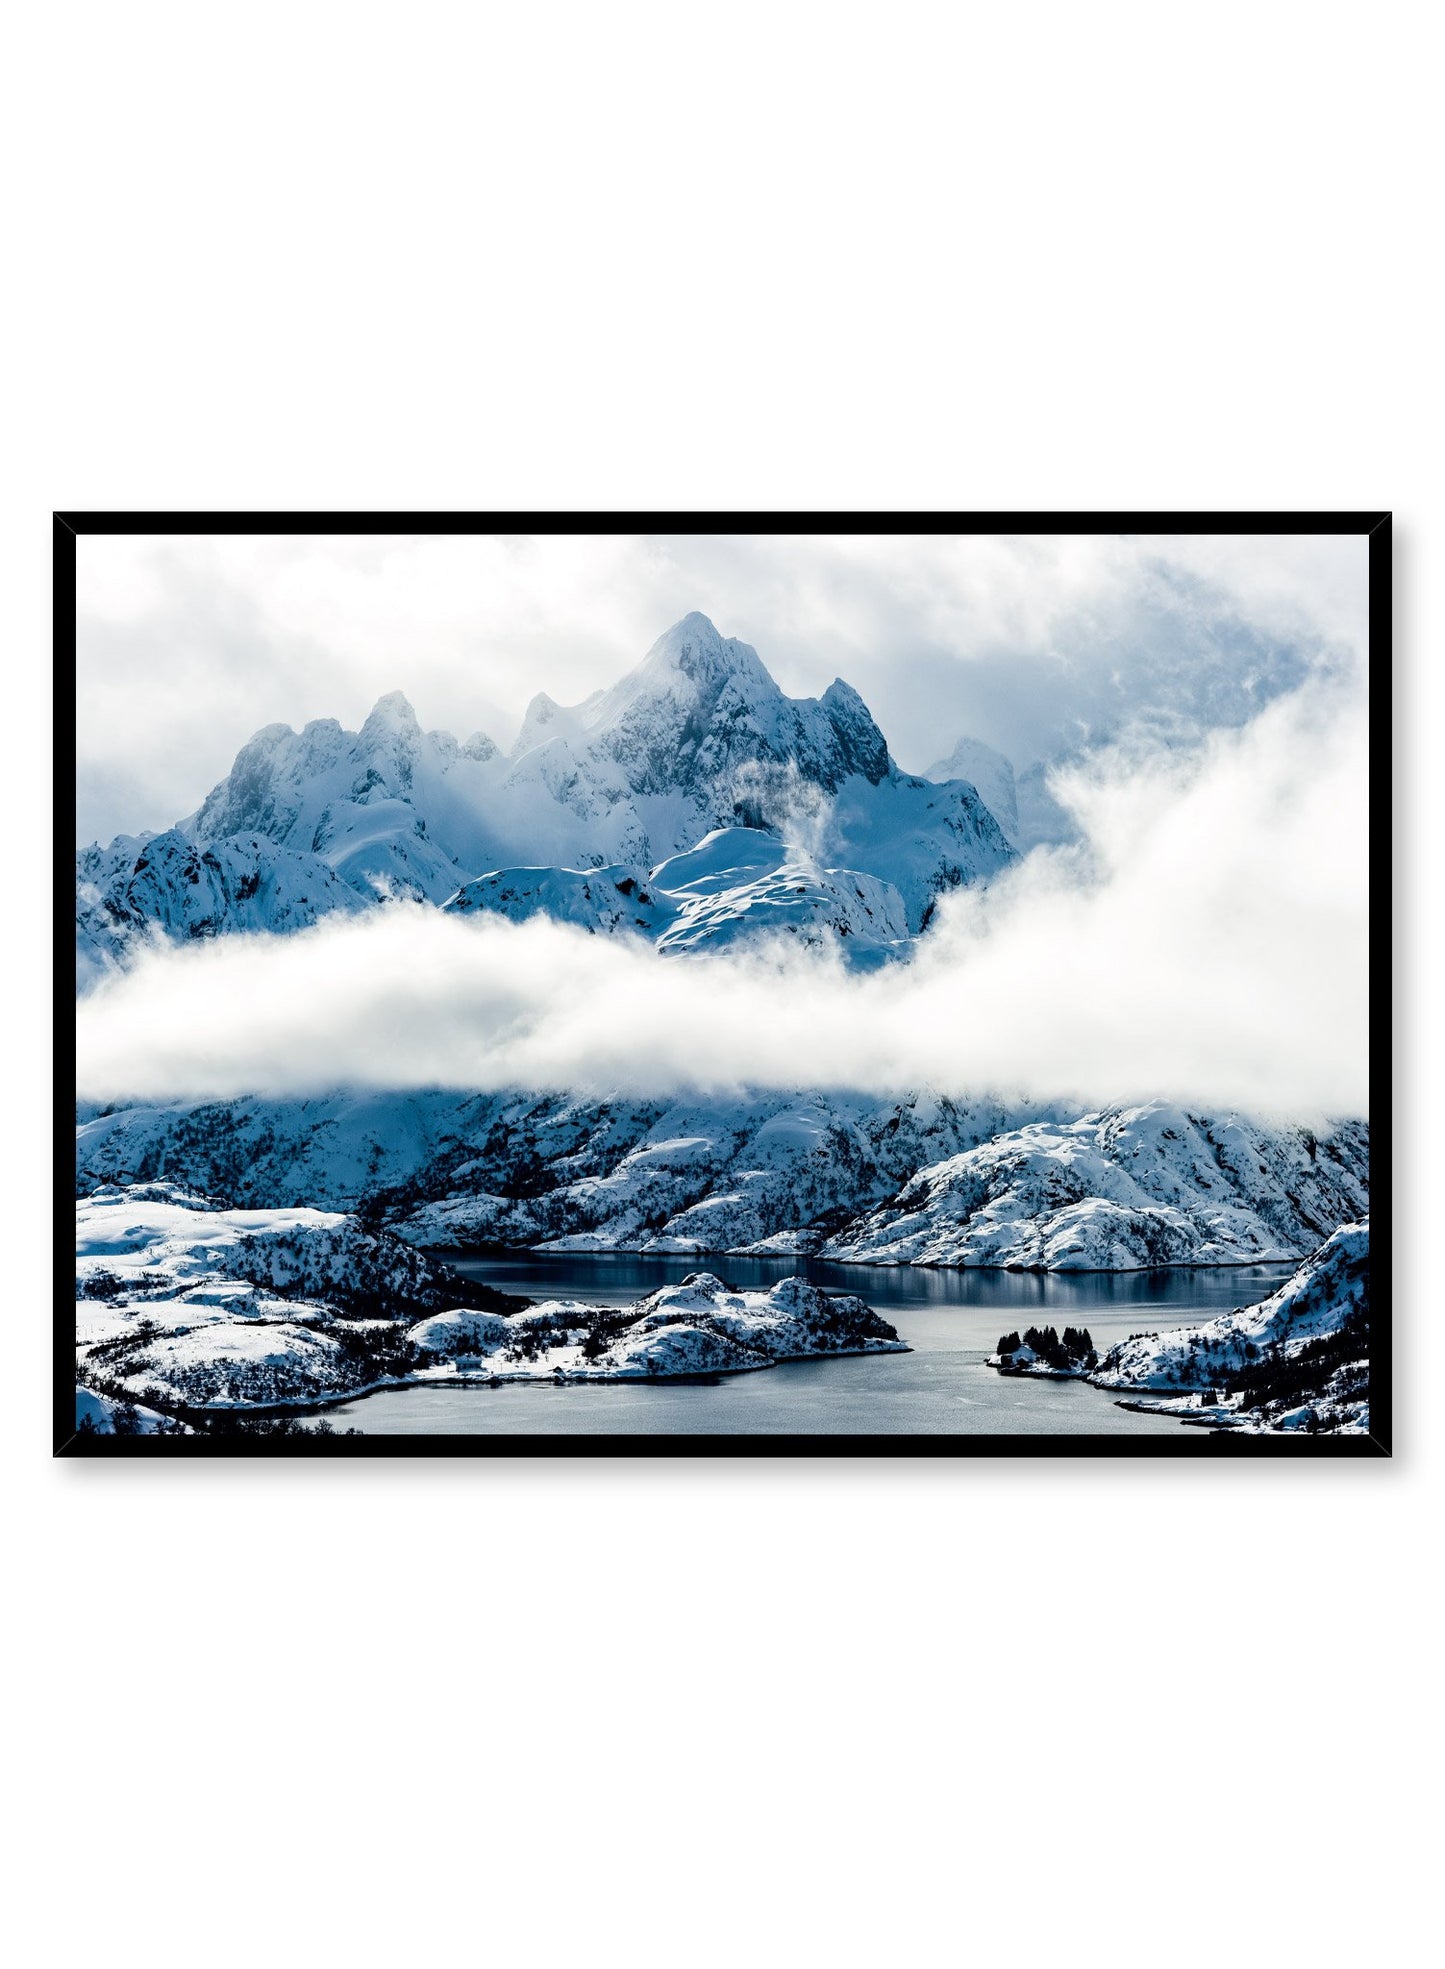 Landscape photography poster by Opposite Wall with mountain peaks